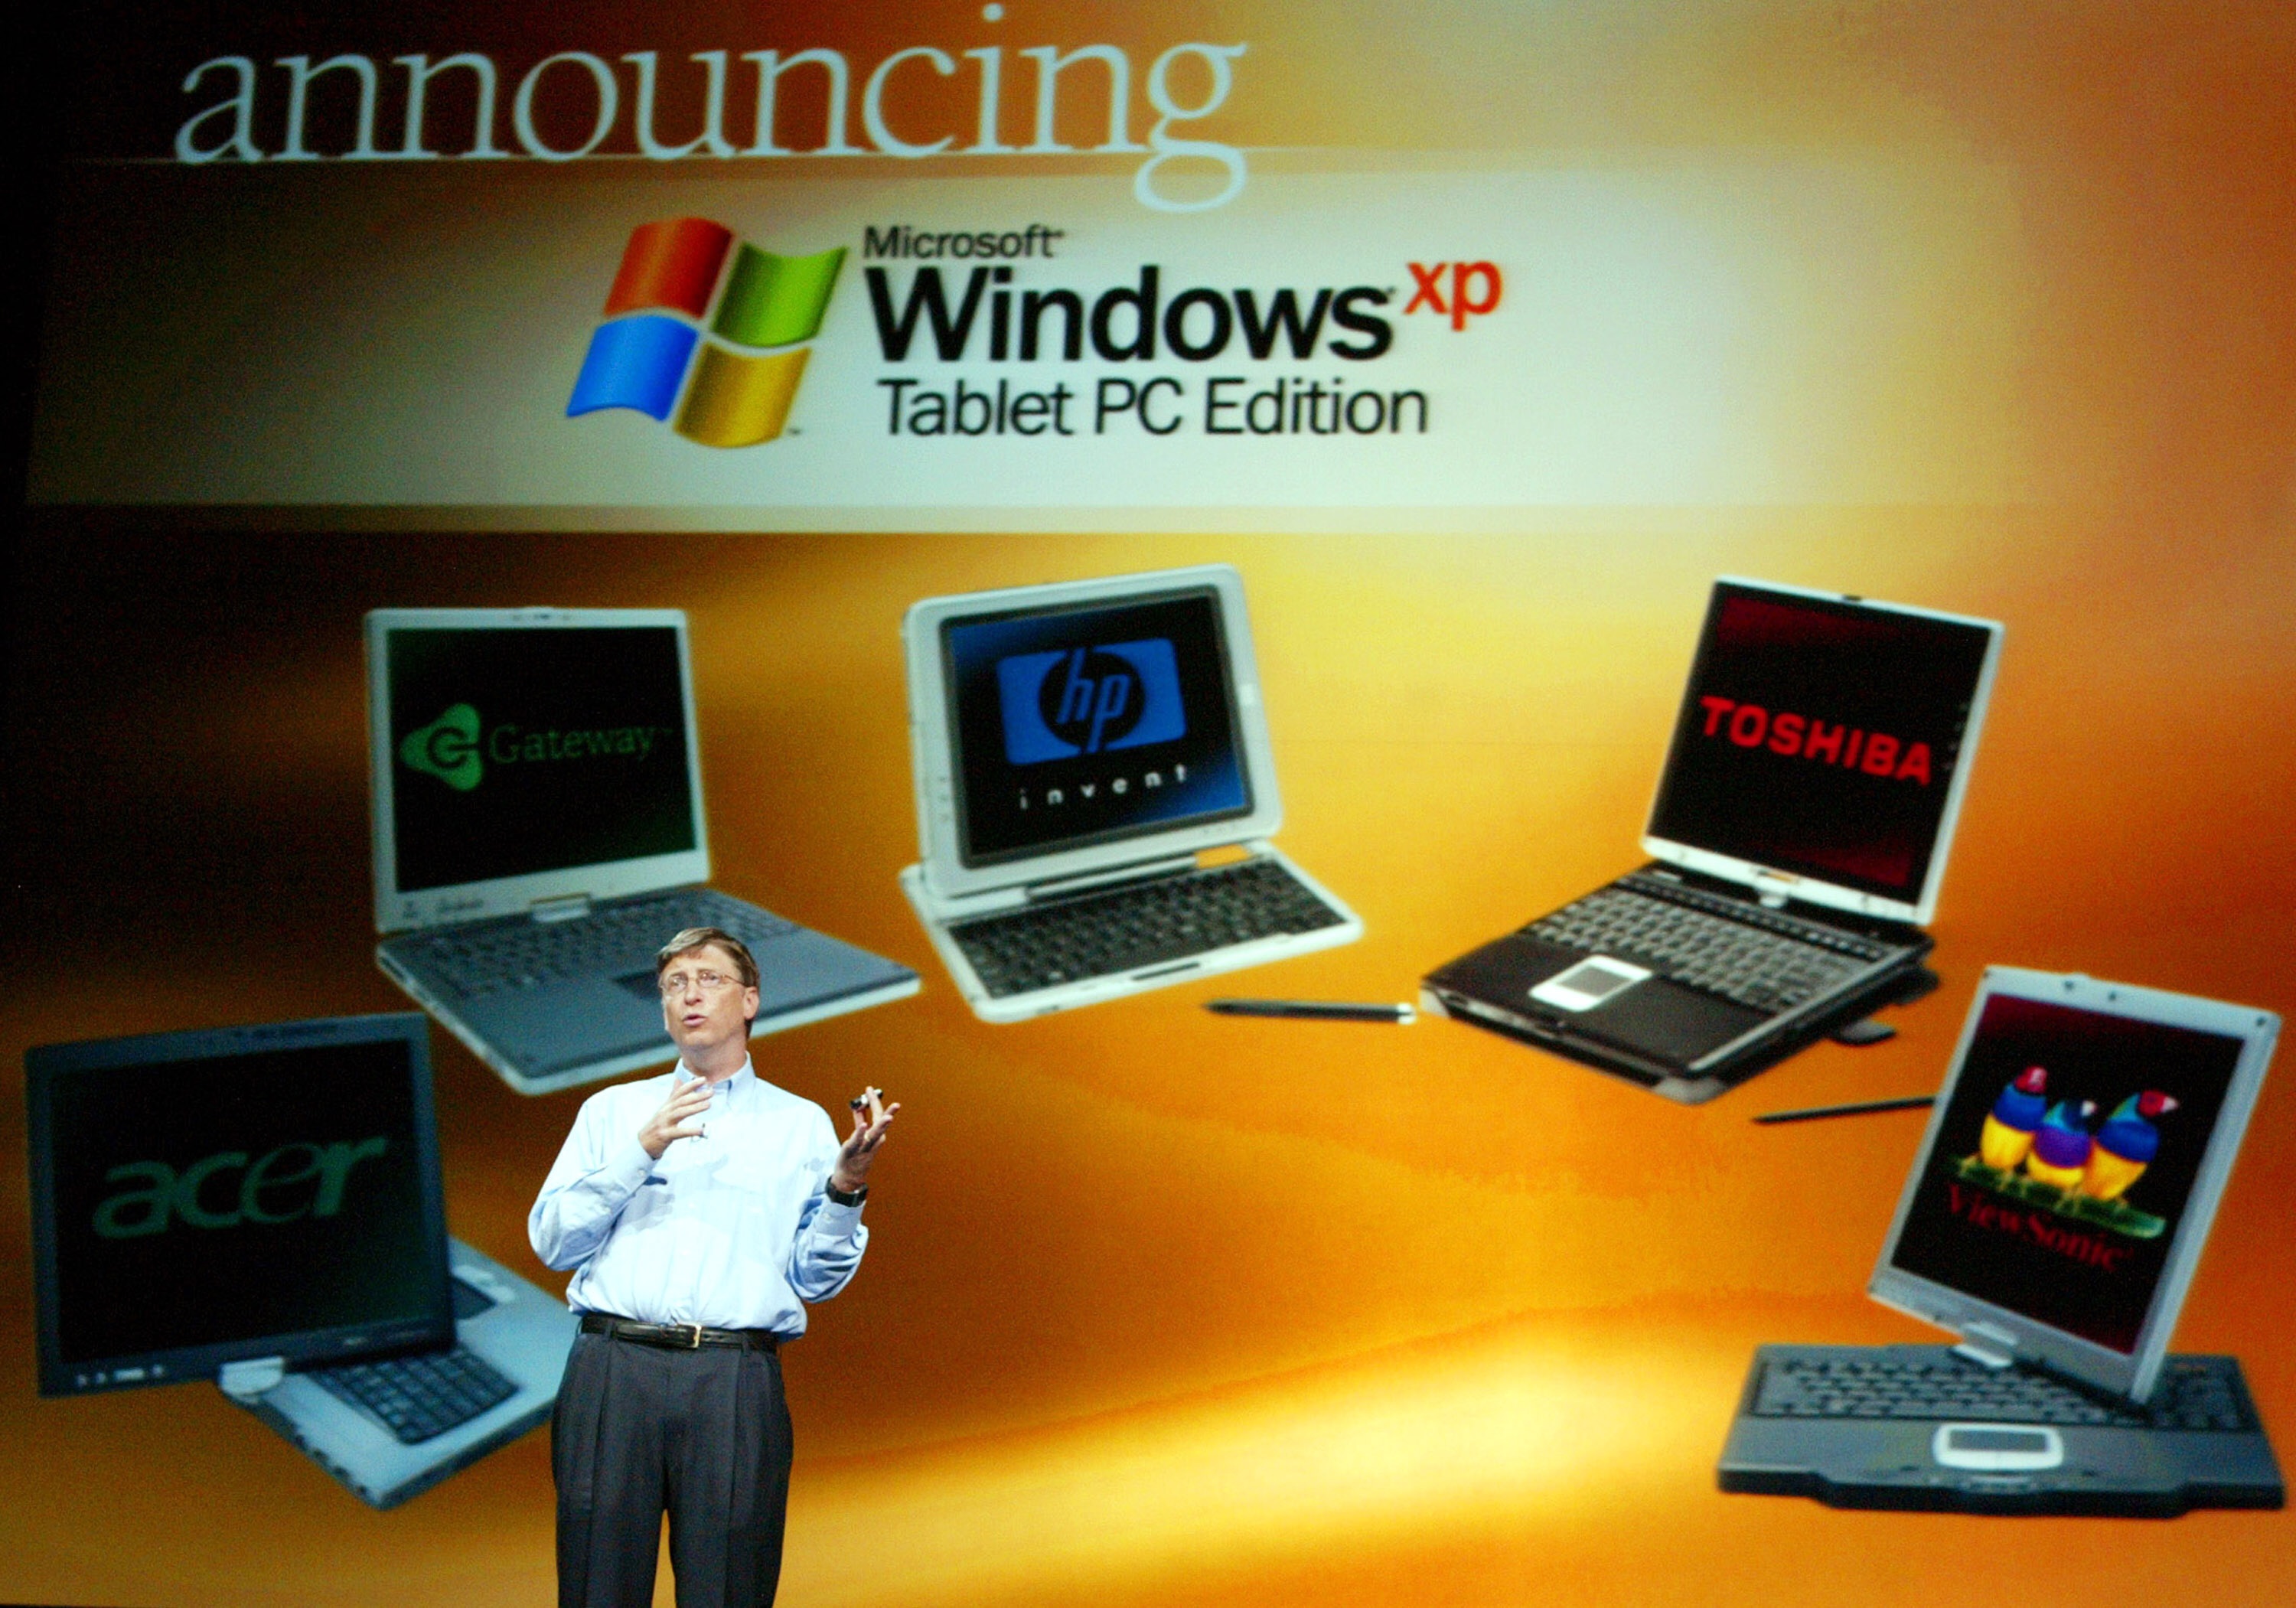 Bill Gates shows off Tablet PCs at COMDEX in Las Vegas on November 16, 2003 (Jeff Christensen / WireImage / Getty Images)